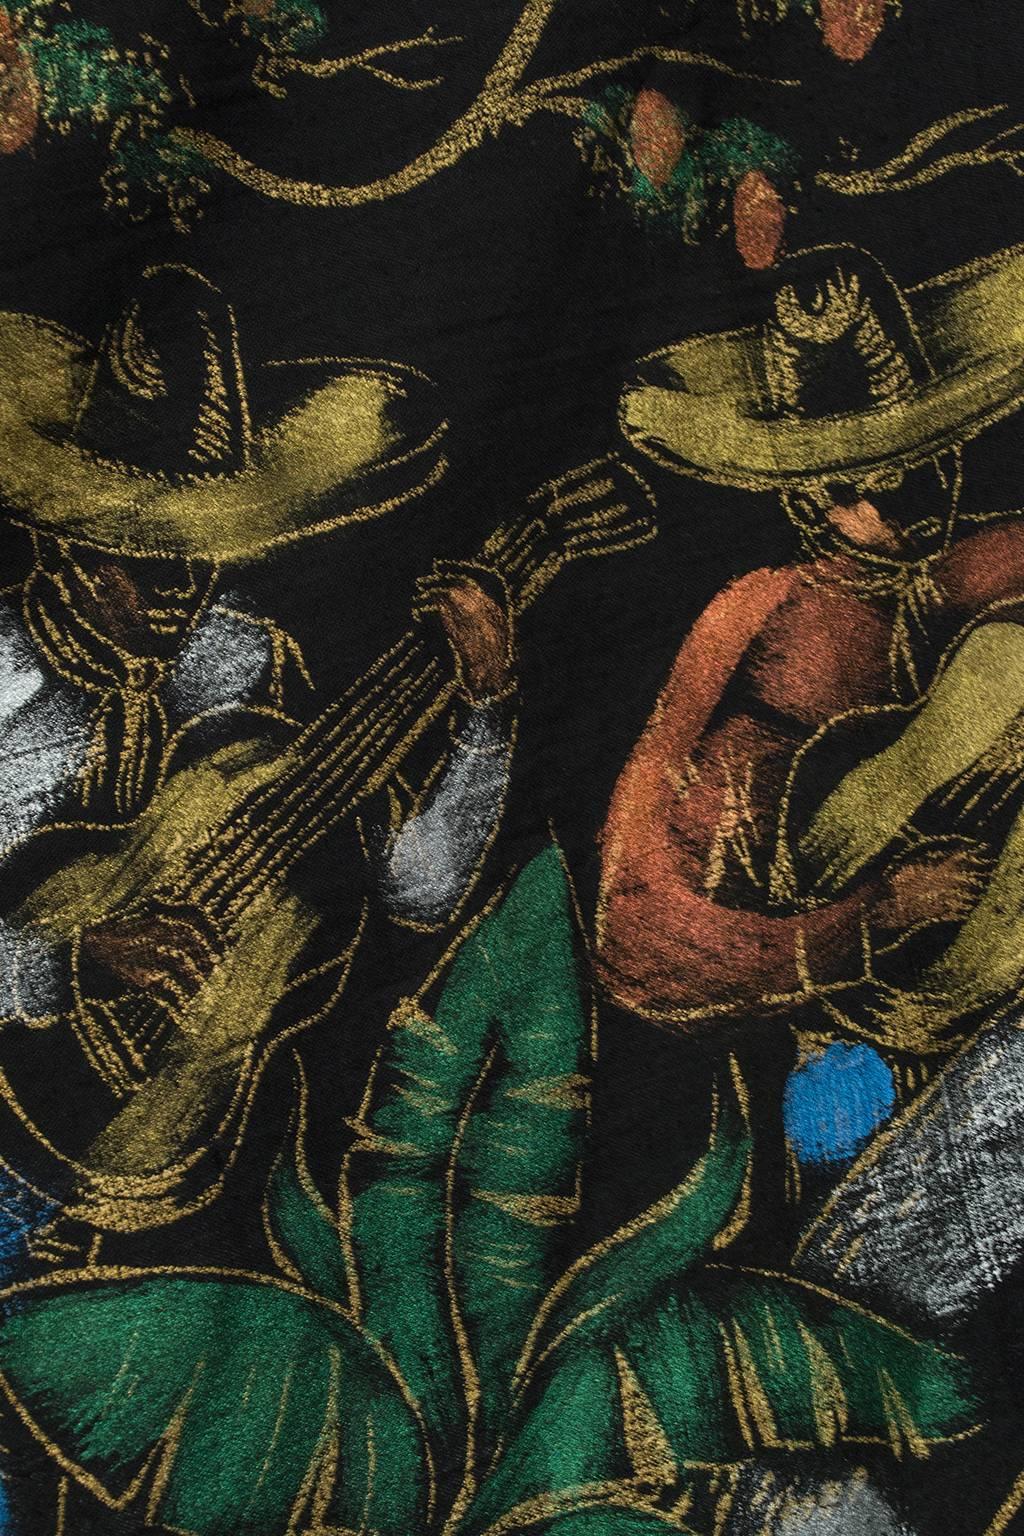 Women's Hand Painted Mariachi Scene Mexican Circle Skirt - Jácome Estate, 1950s